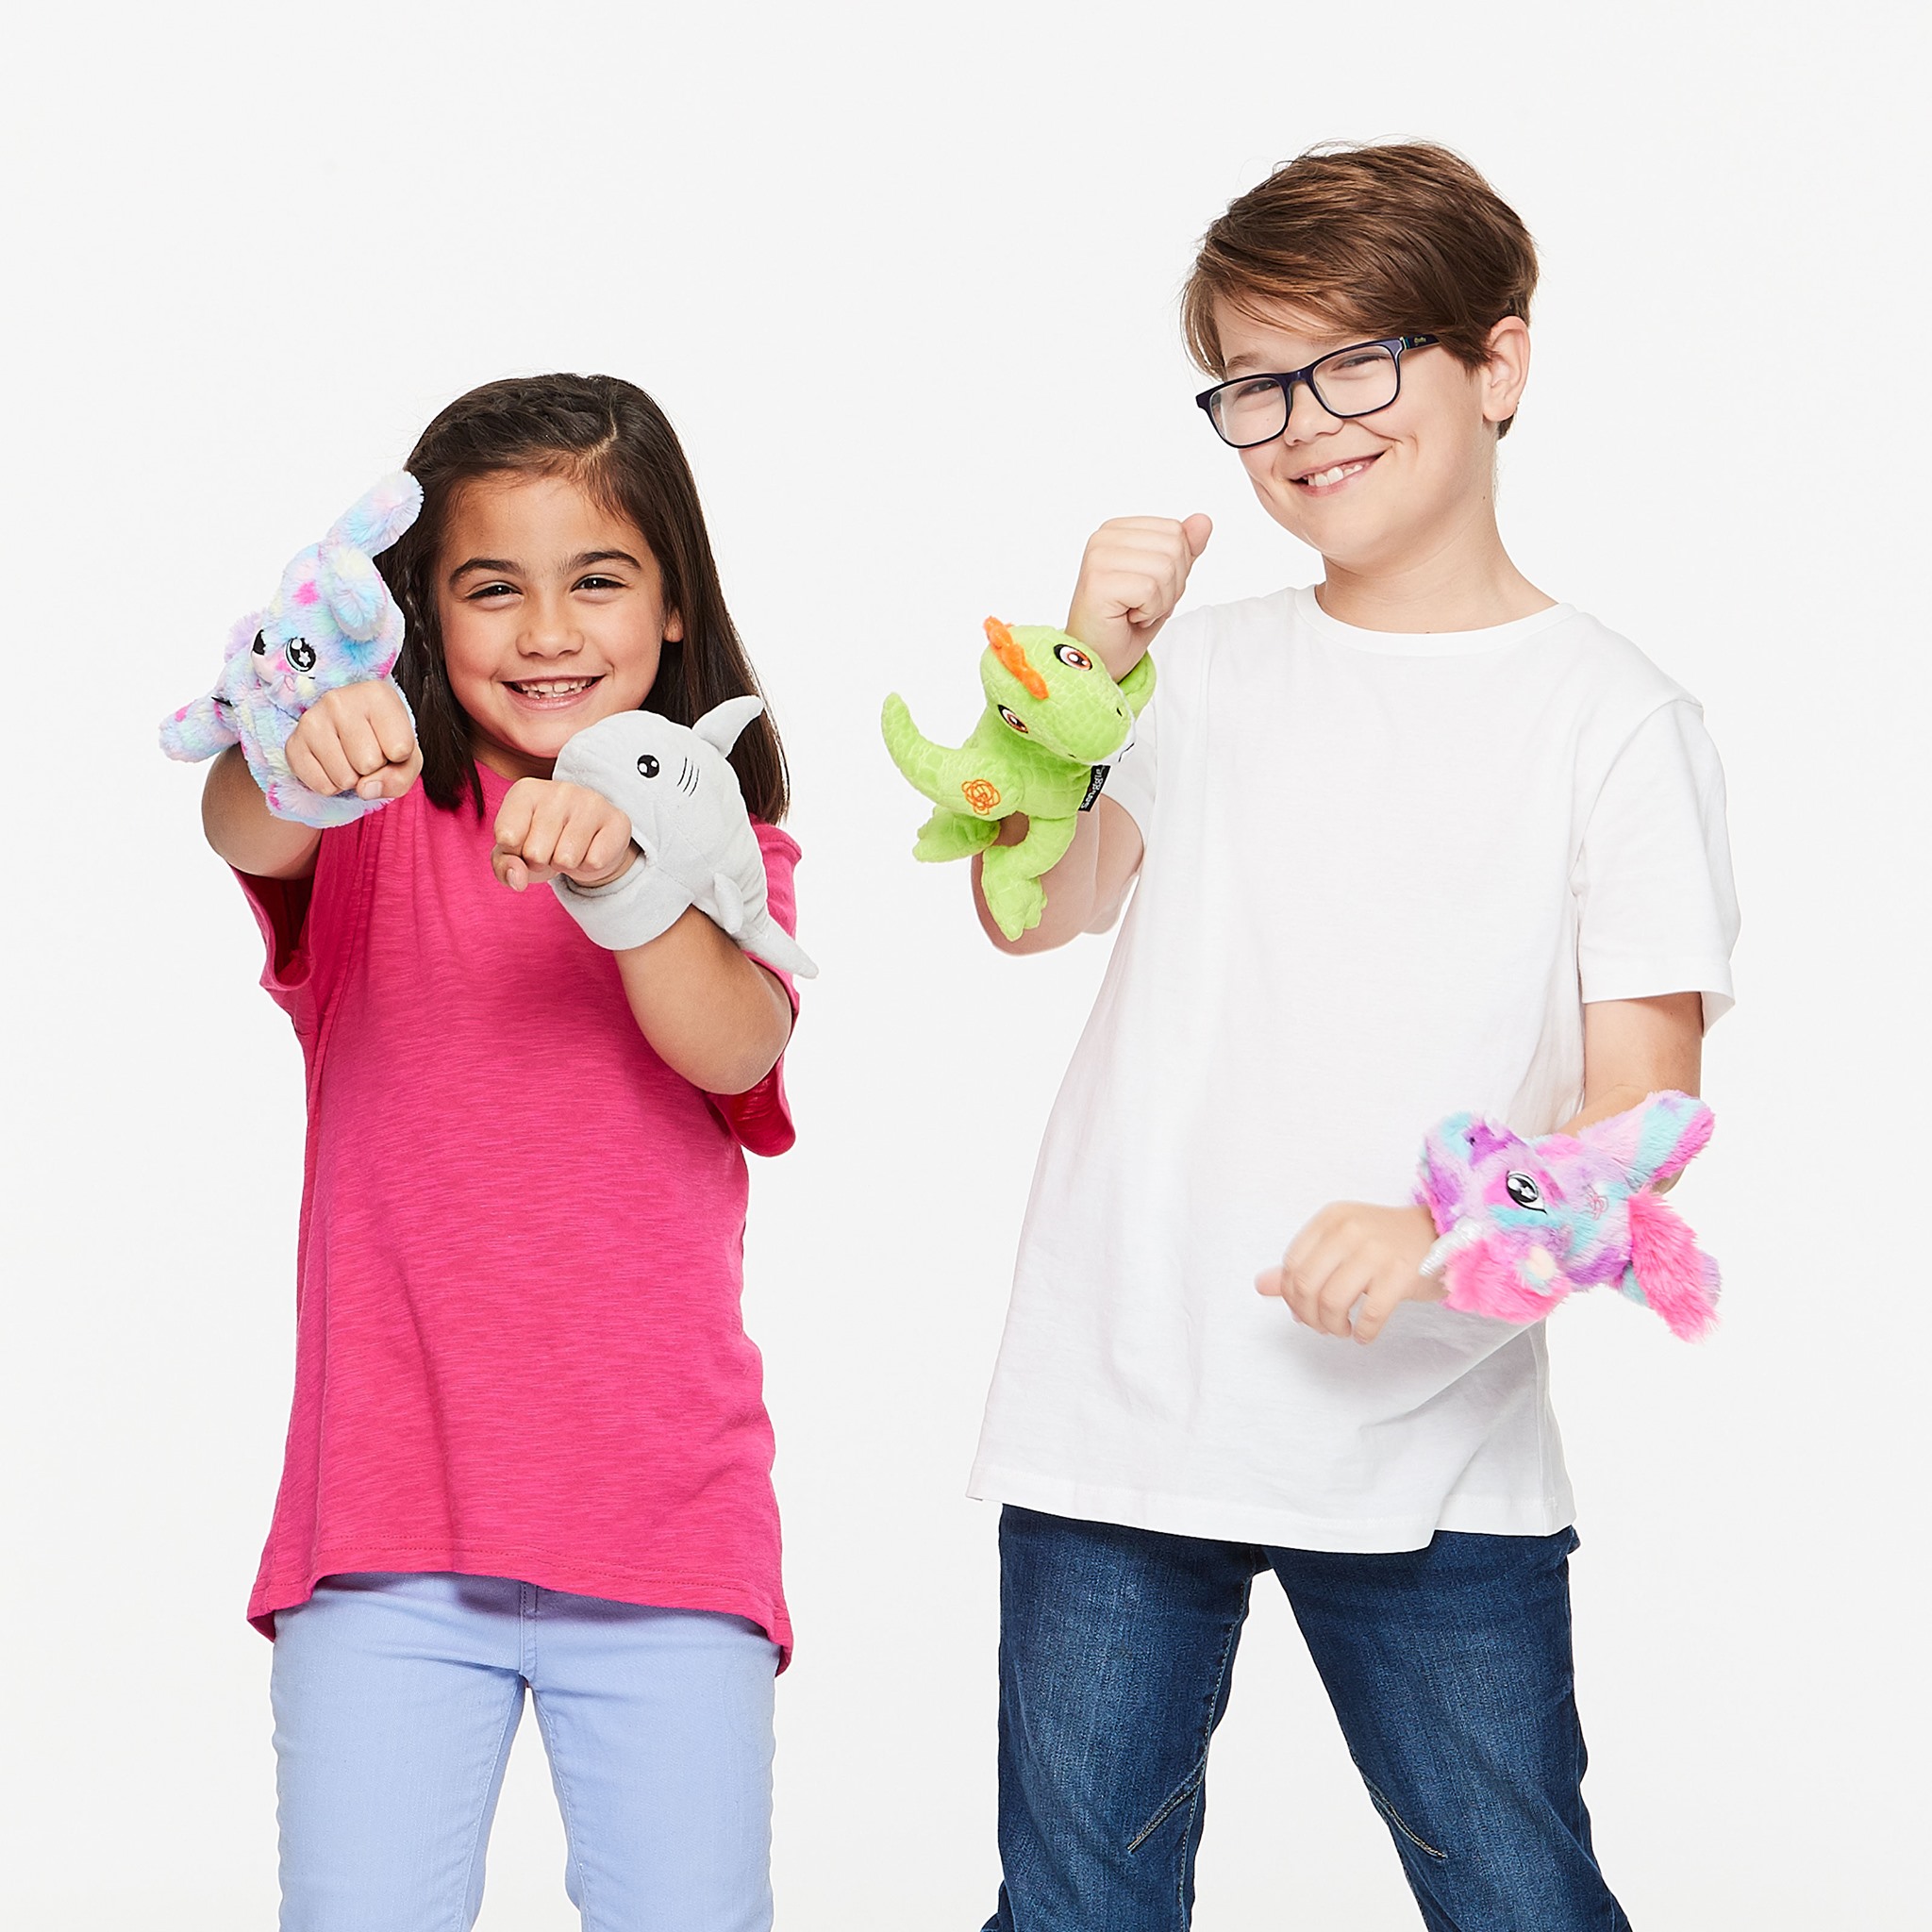 Hug-a-bud ✔️ Slapband ✔️ Unicorn ✔️ Our mini hug-a-bud slapbands have our TICK of approval 😆 Which one is your fave? Shop instore now! 